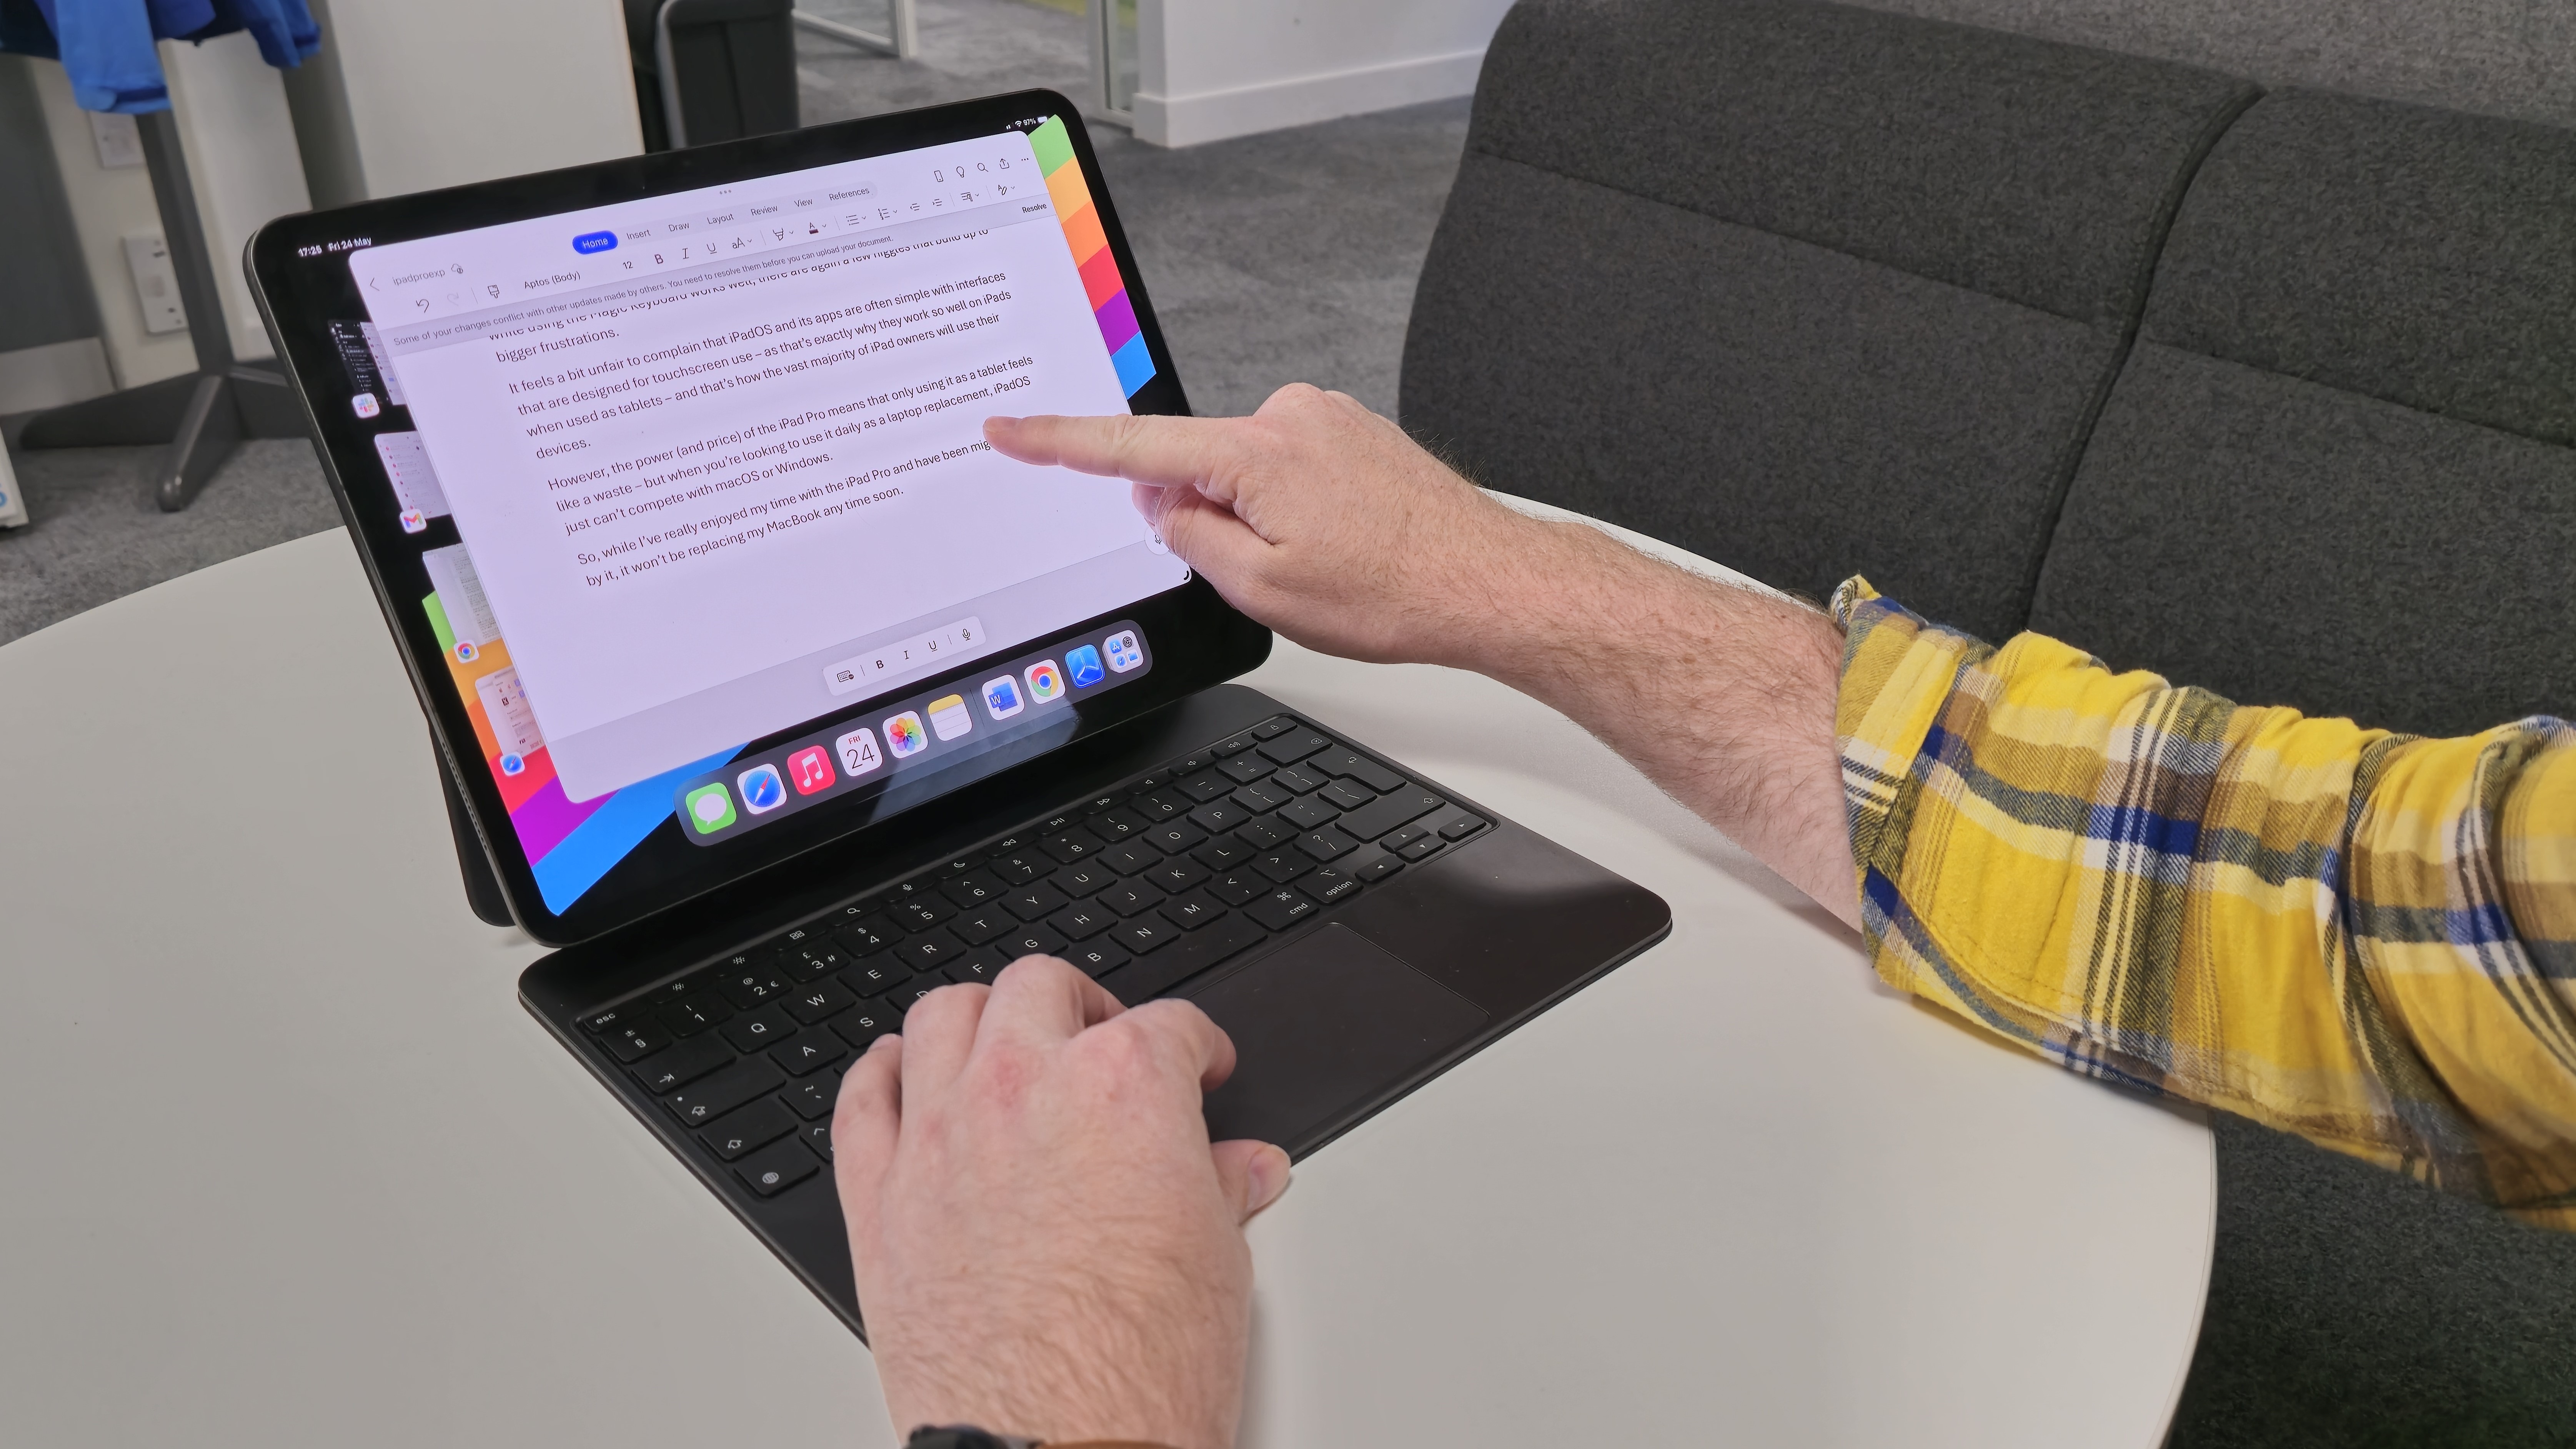 iPad Pro used as a laptop in an office